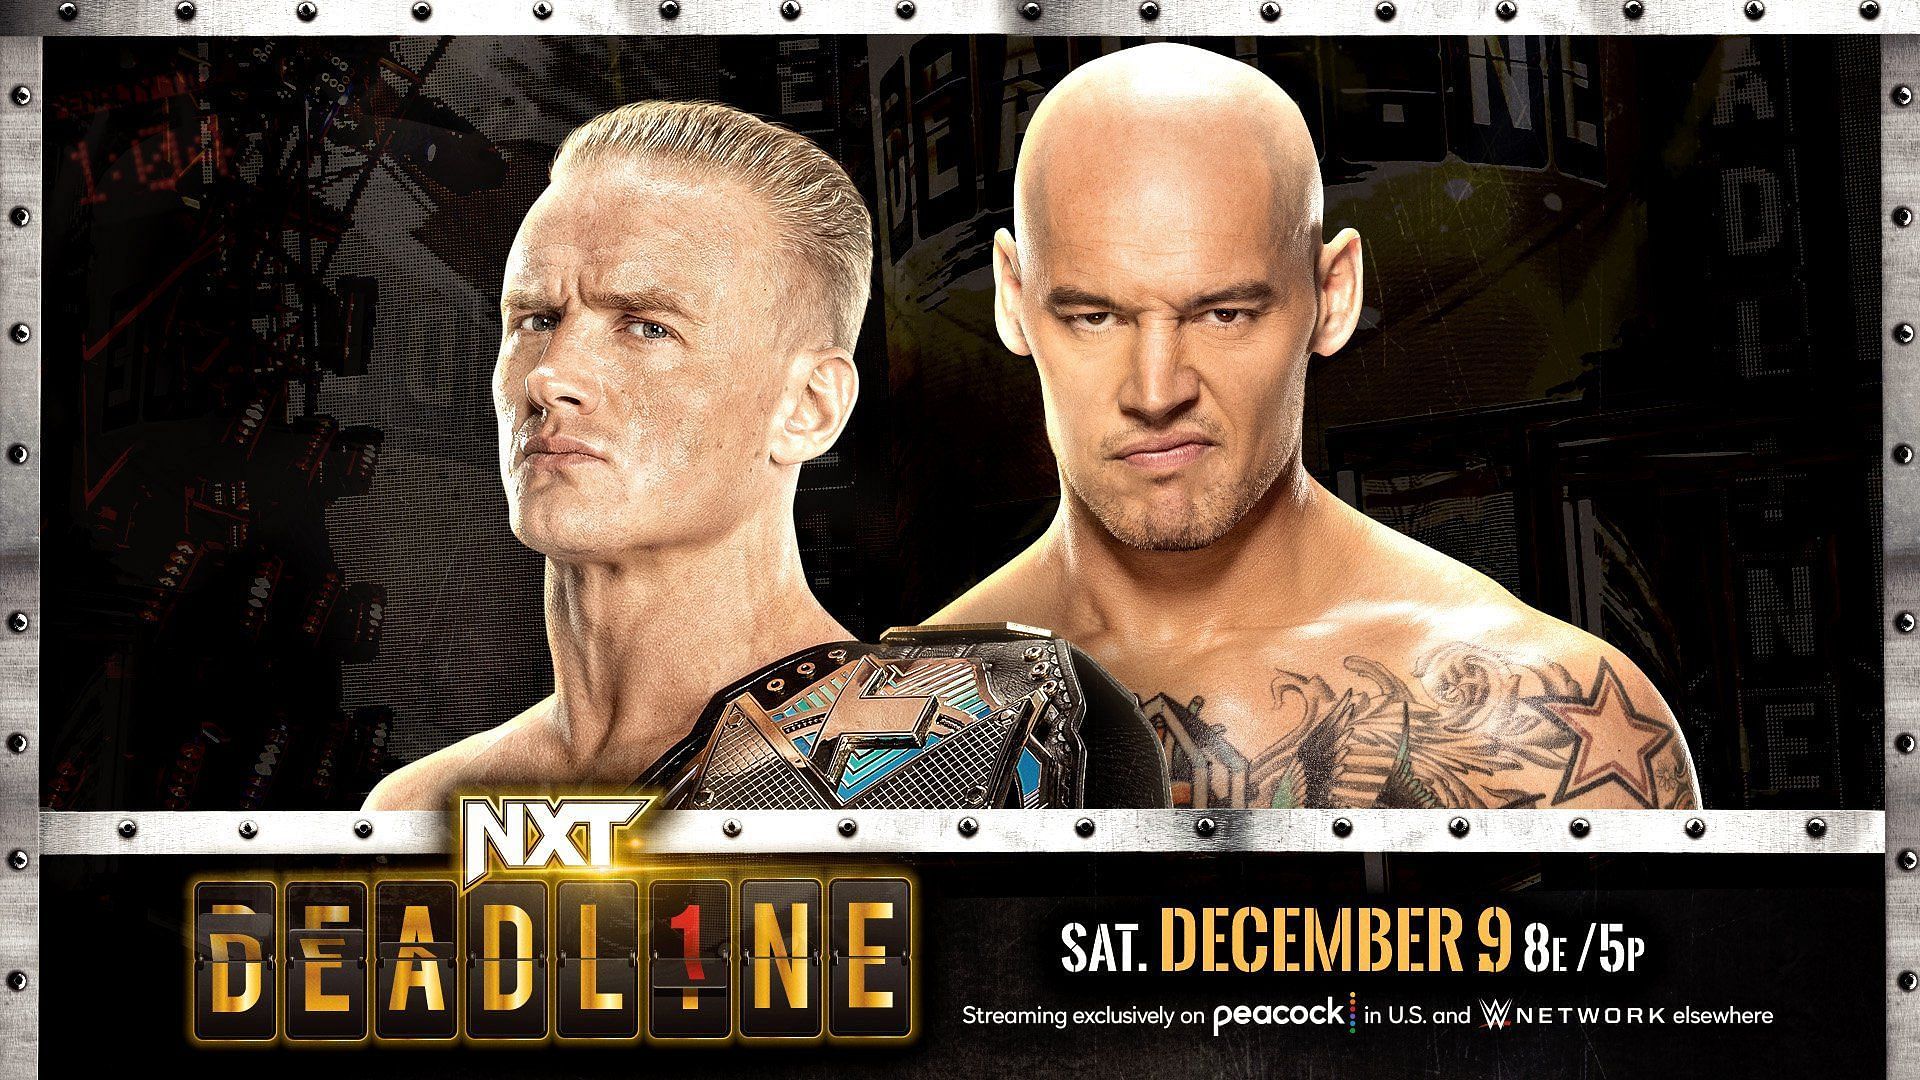 Will The Mad Dragon have the last laugh at NXT Deadline?